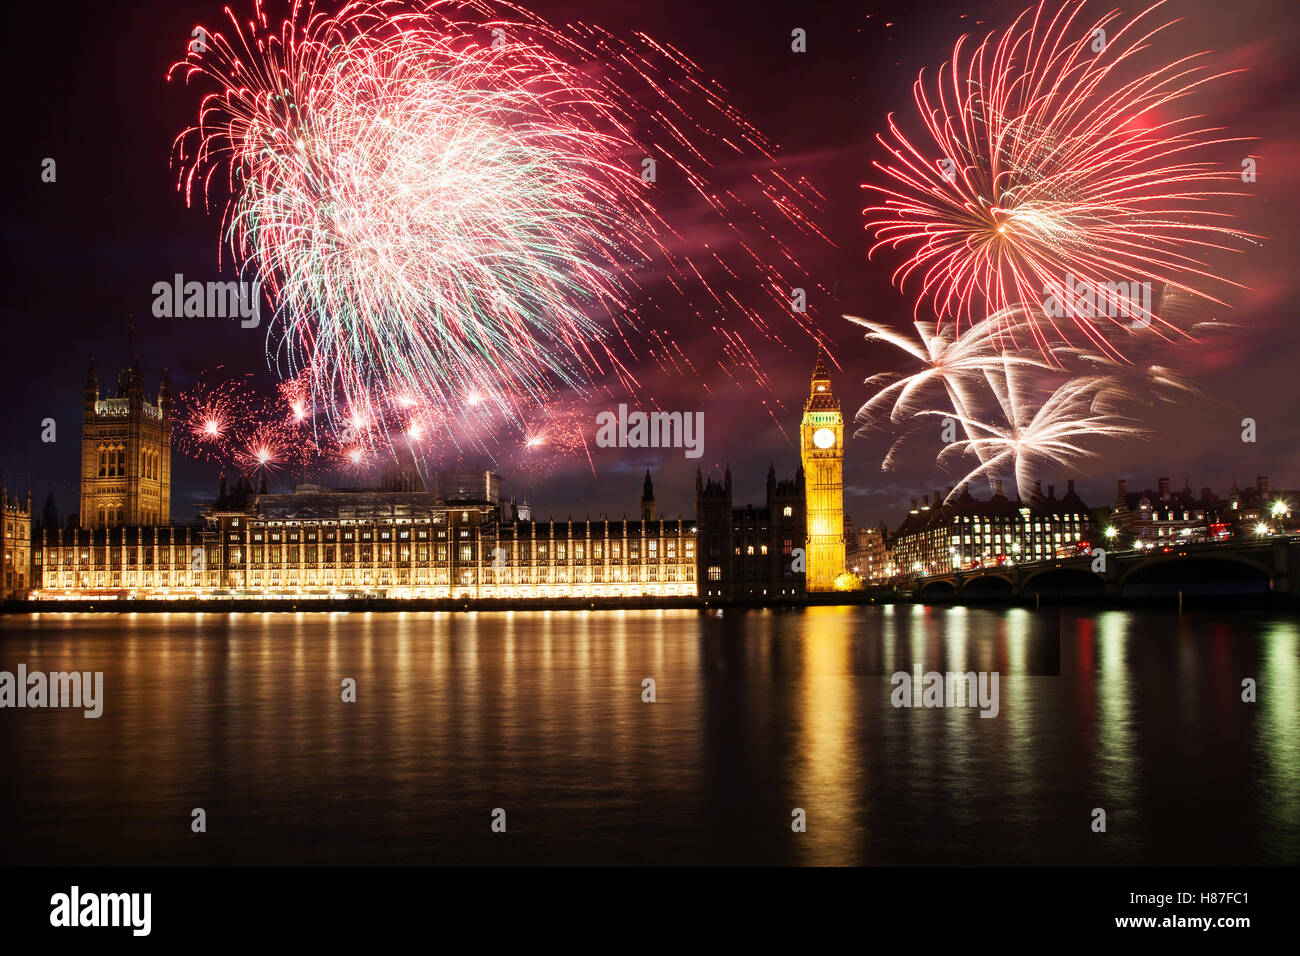 explosive fireworks display around Big Ben. New Year's Eve in the city - celebration background Stock Photo